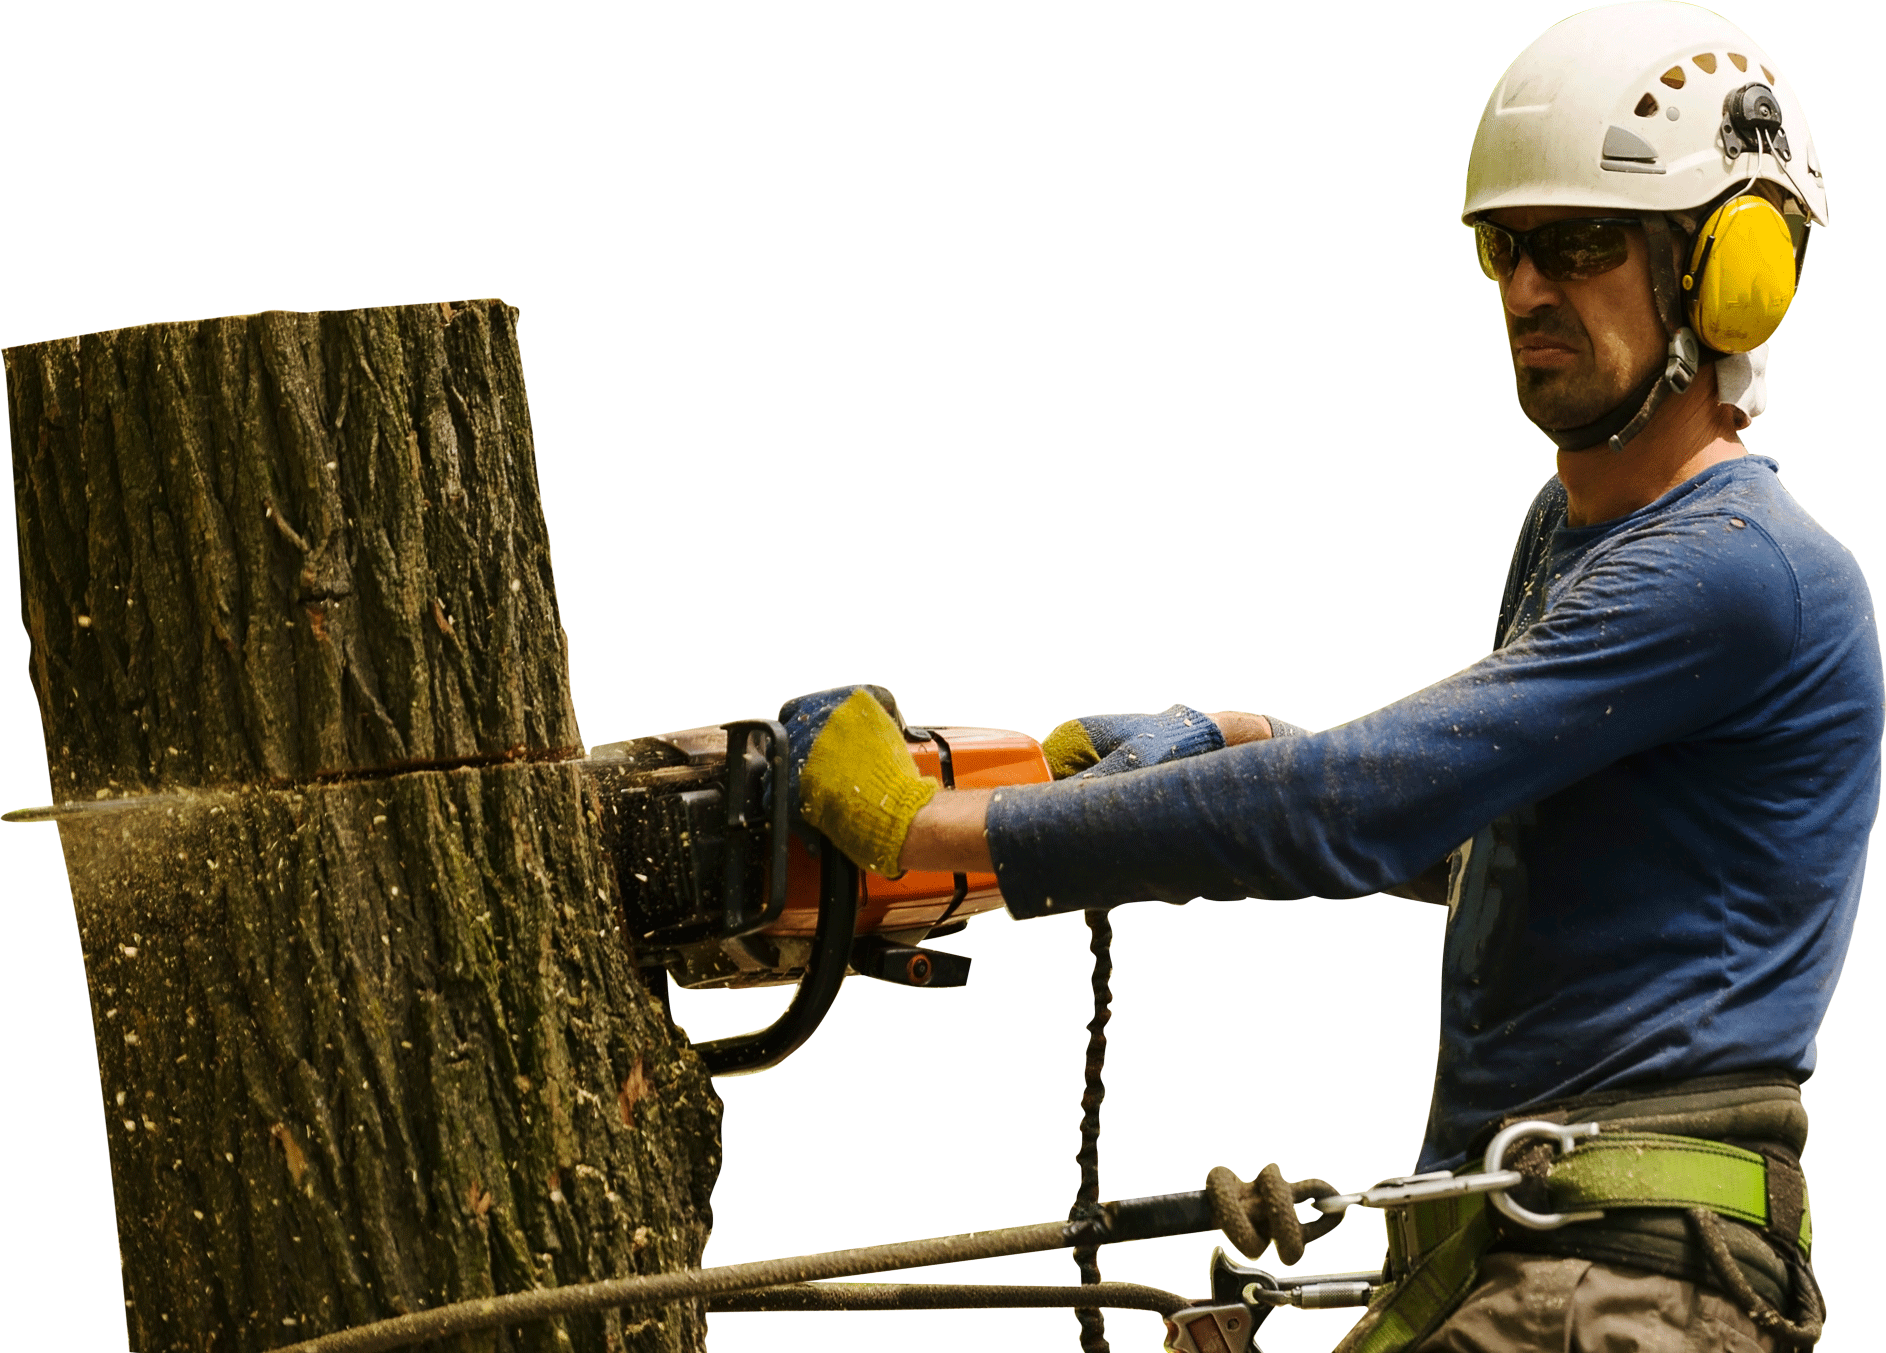 A tree is being cut down by an arborist